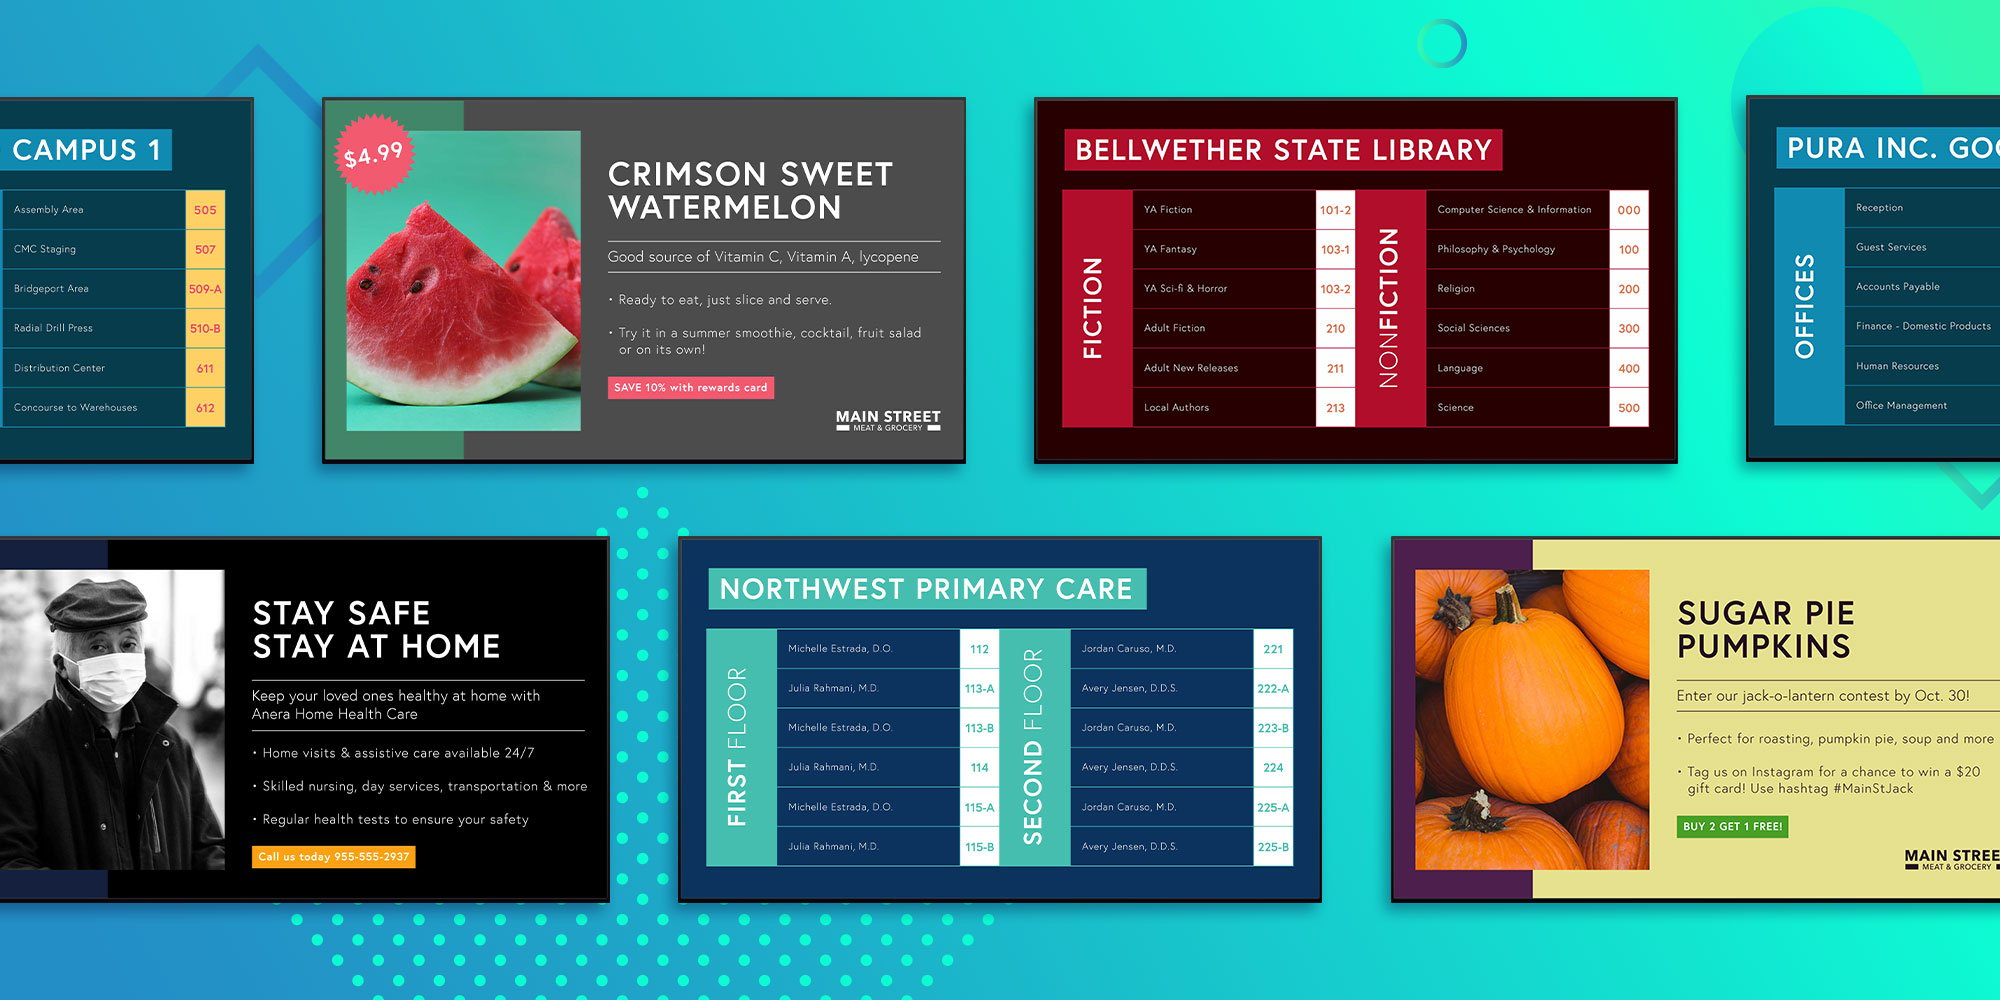 New Ditto Digital Signage Templates Promote Featured Items and Display Directories